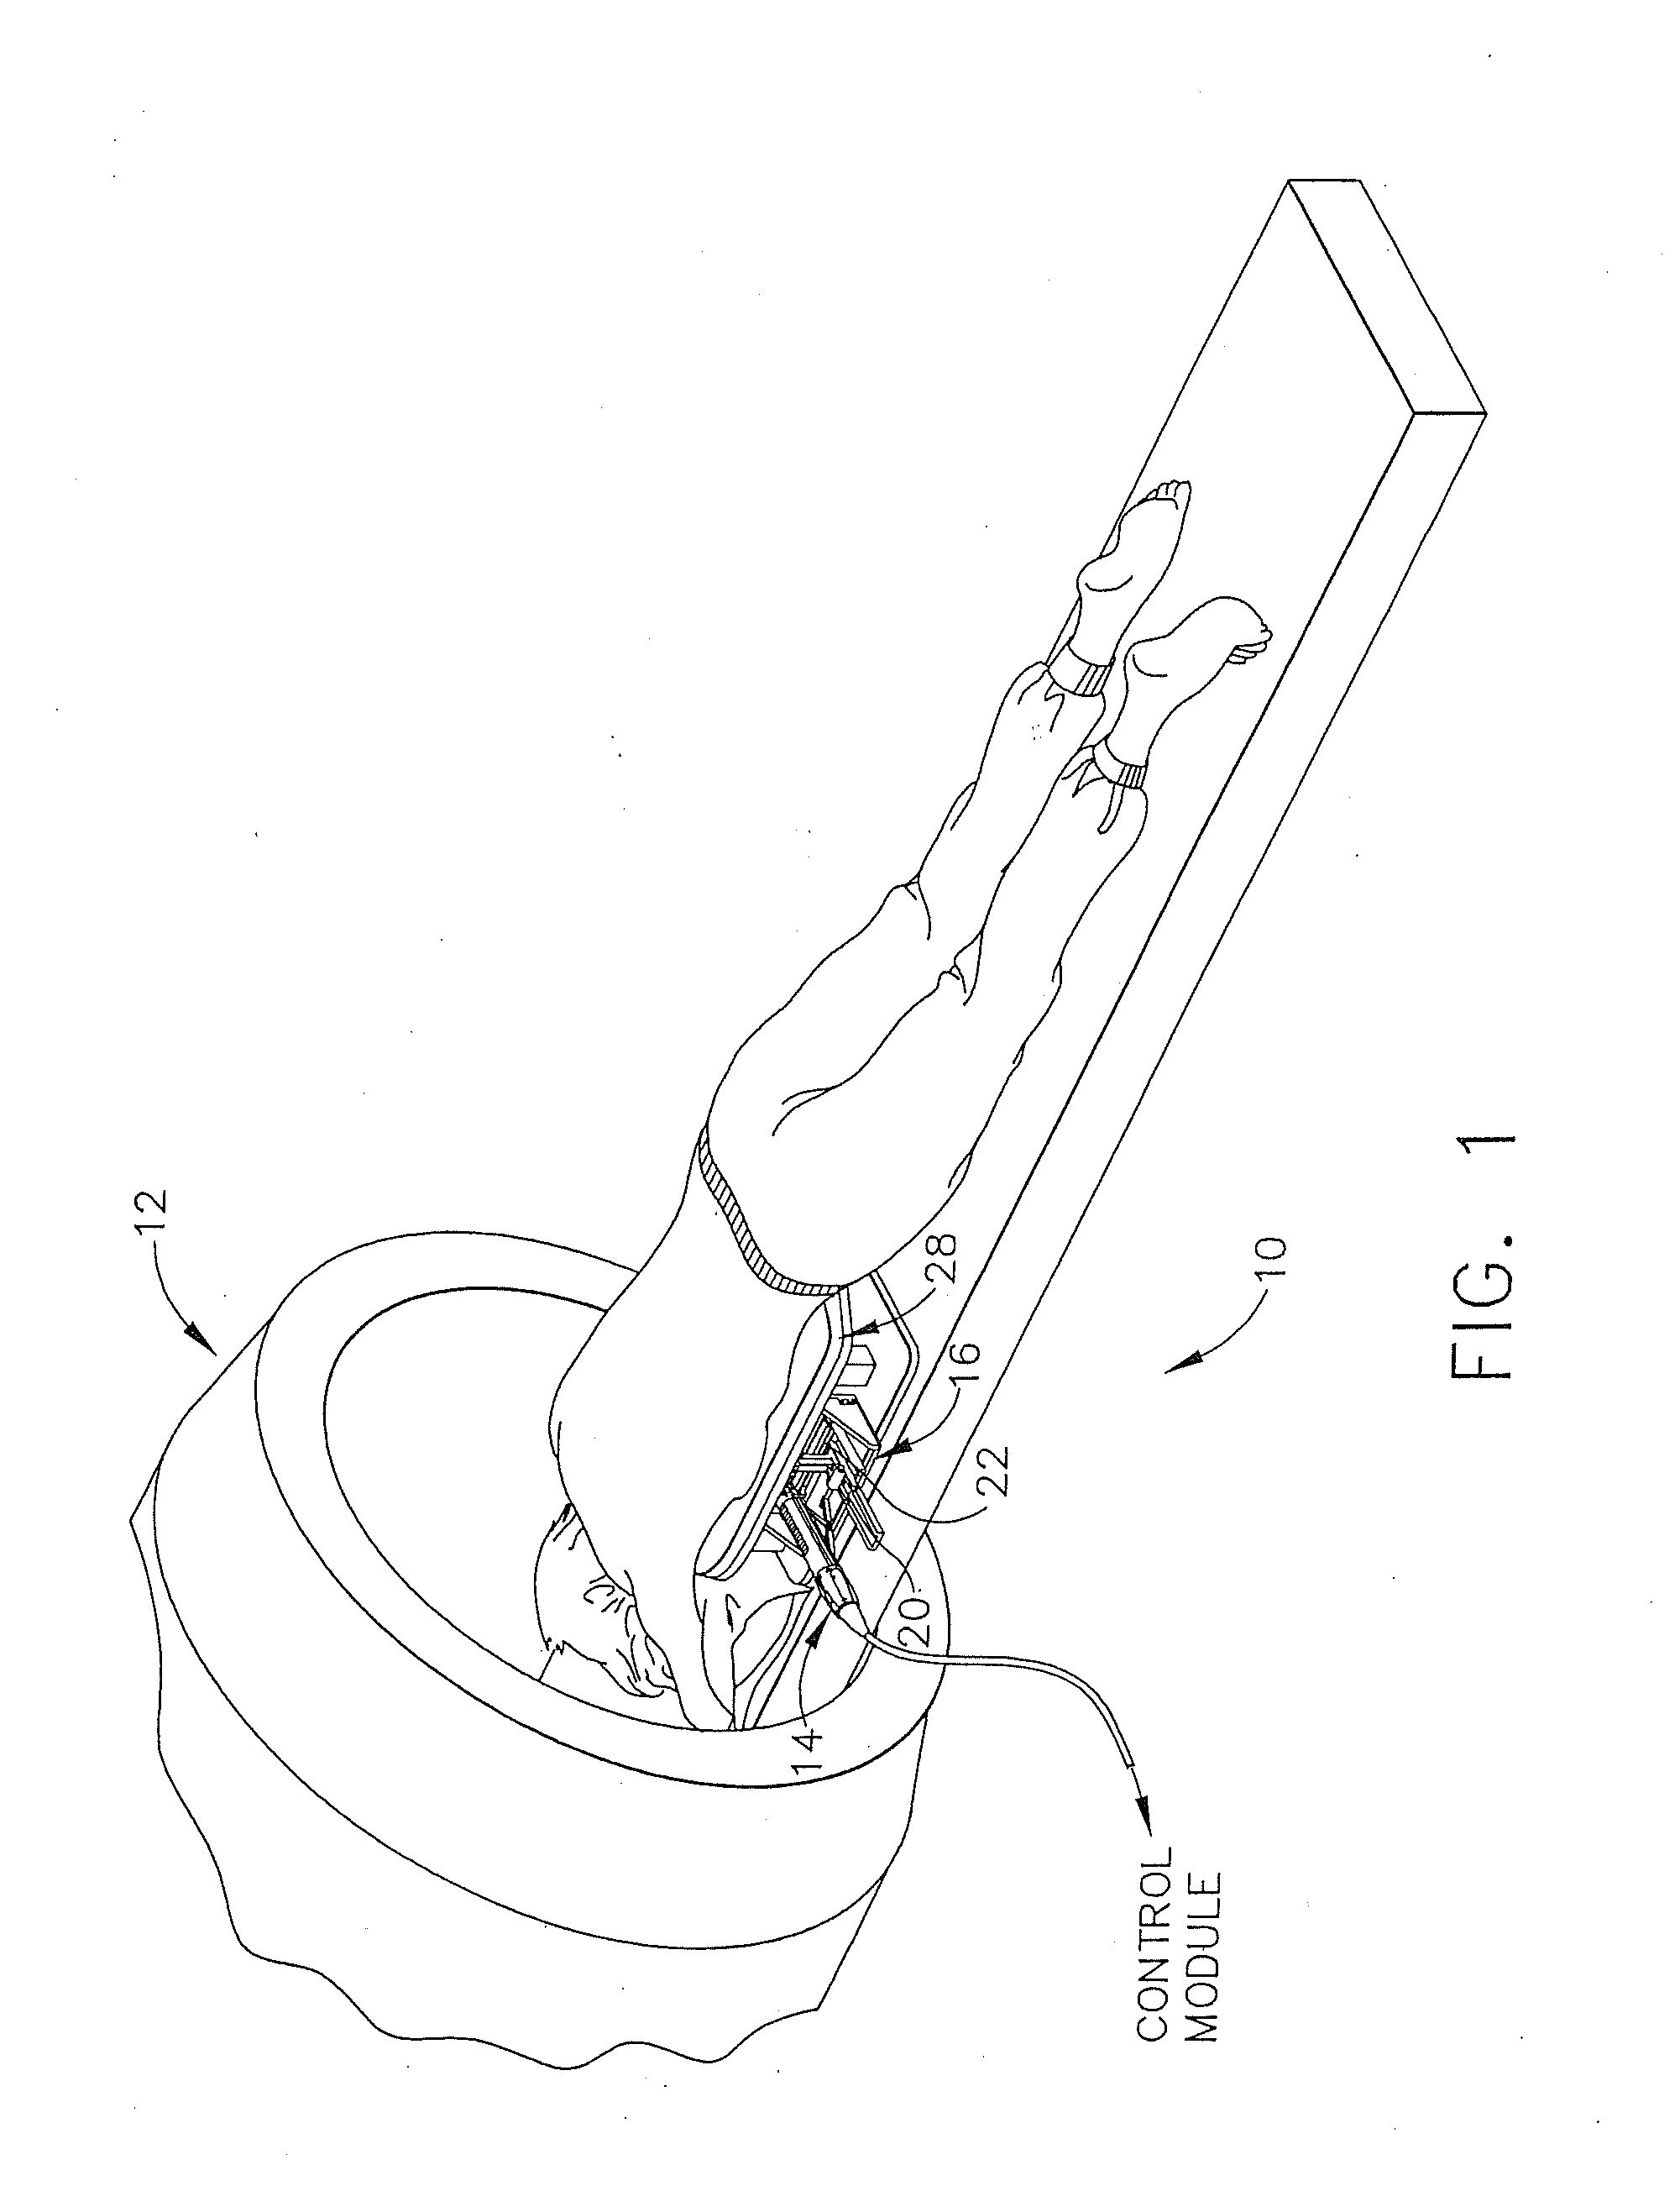 Breast compression assembly for use in MRI biopsy procedure